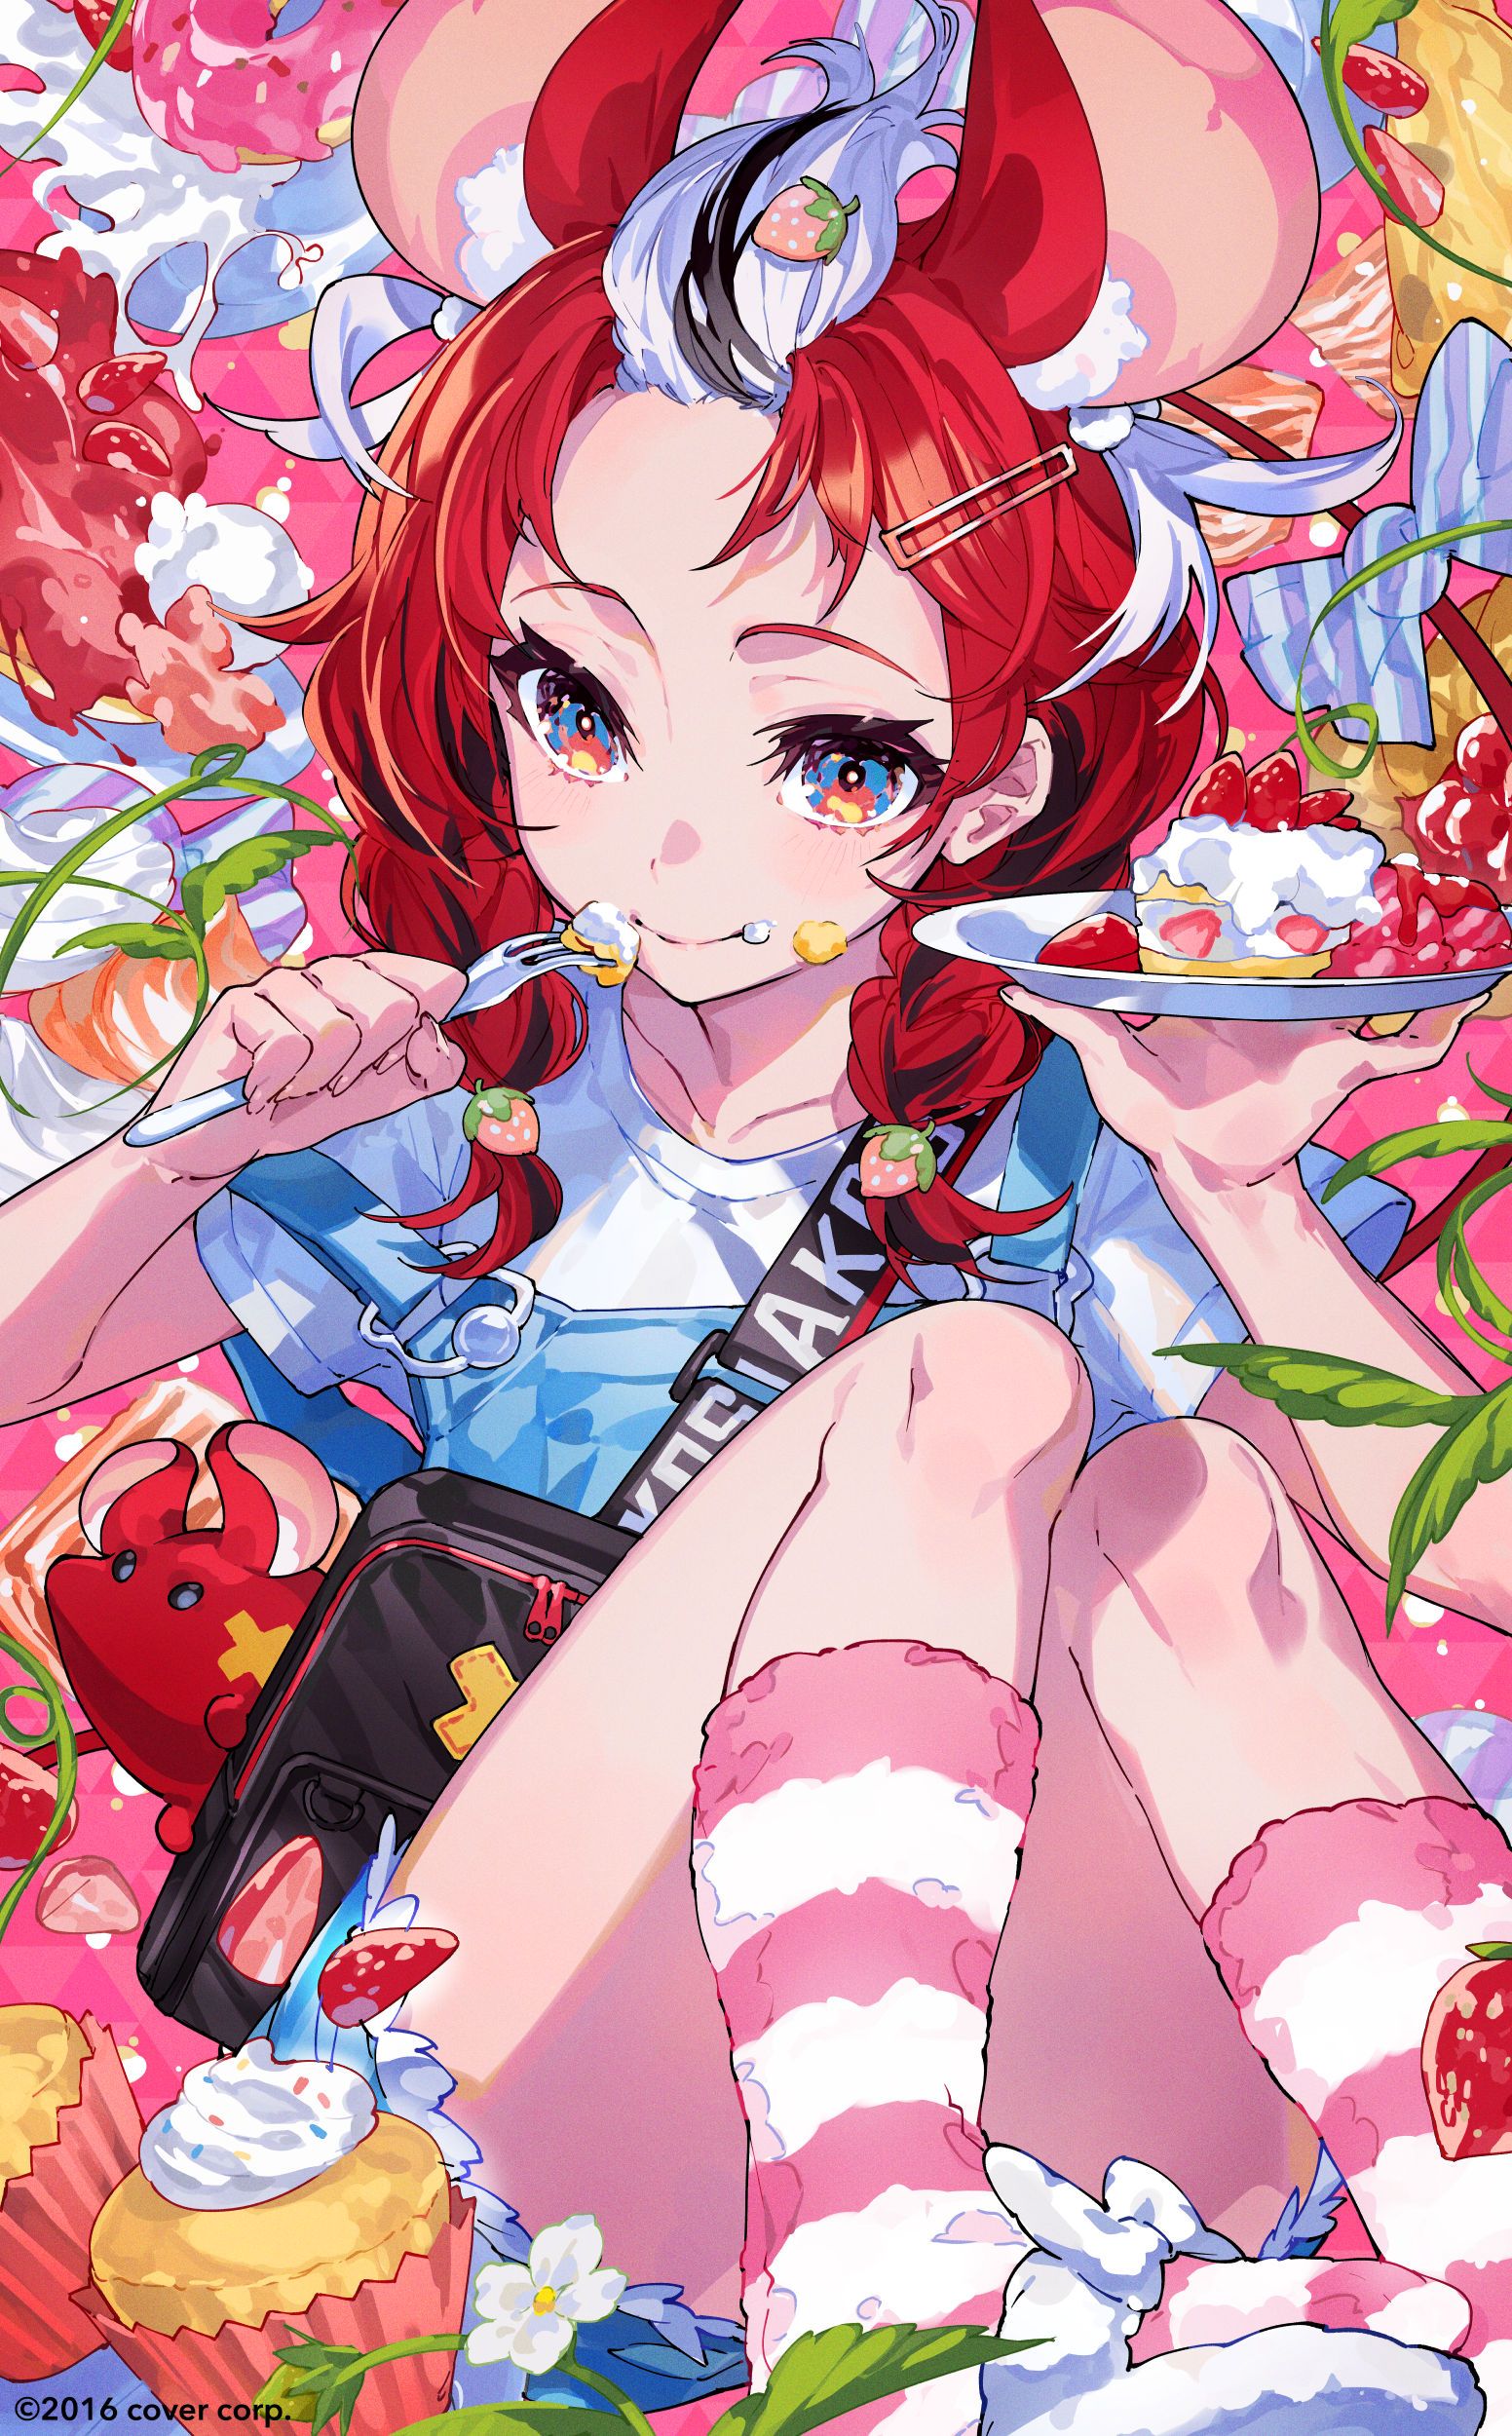 Anime 1552x2500 Hololive mouse ears Hakos Baelz anime girls multi-colored hair leaves cupcakes portrait display Virtual Youtuber fork cake strawberries sweets mouse girls looking at viewer